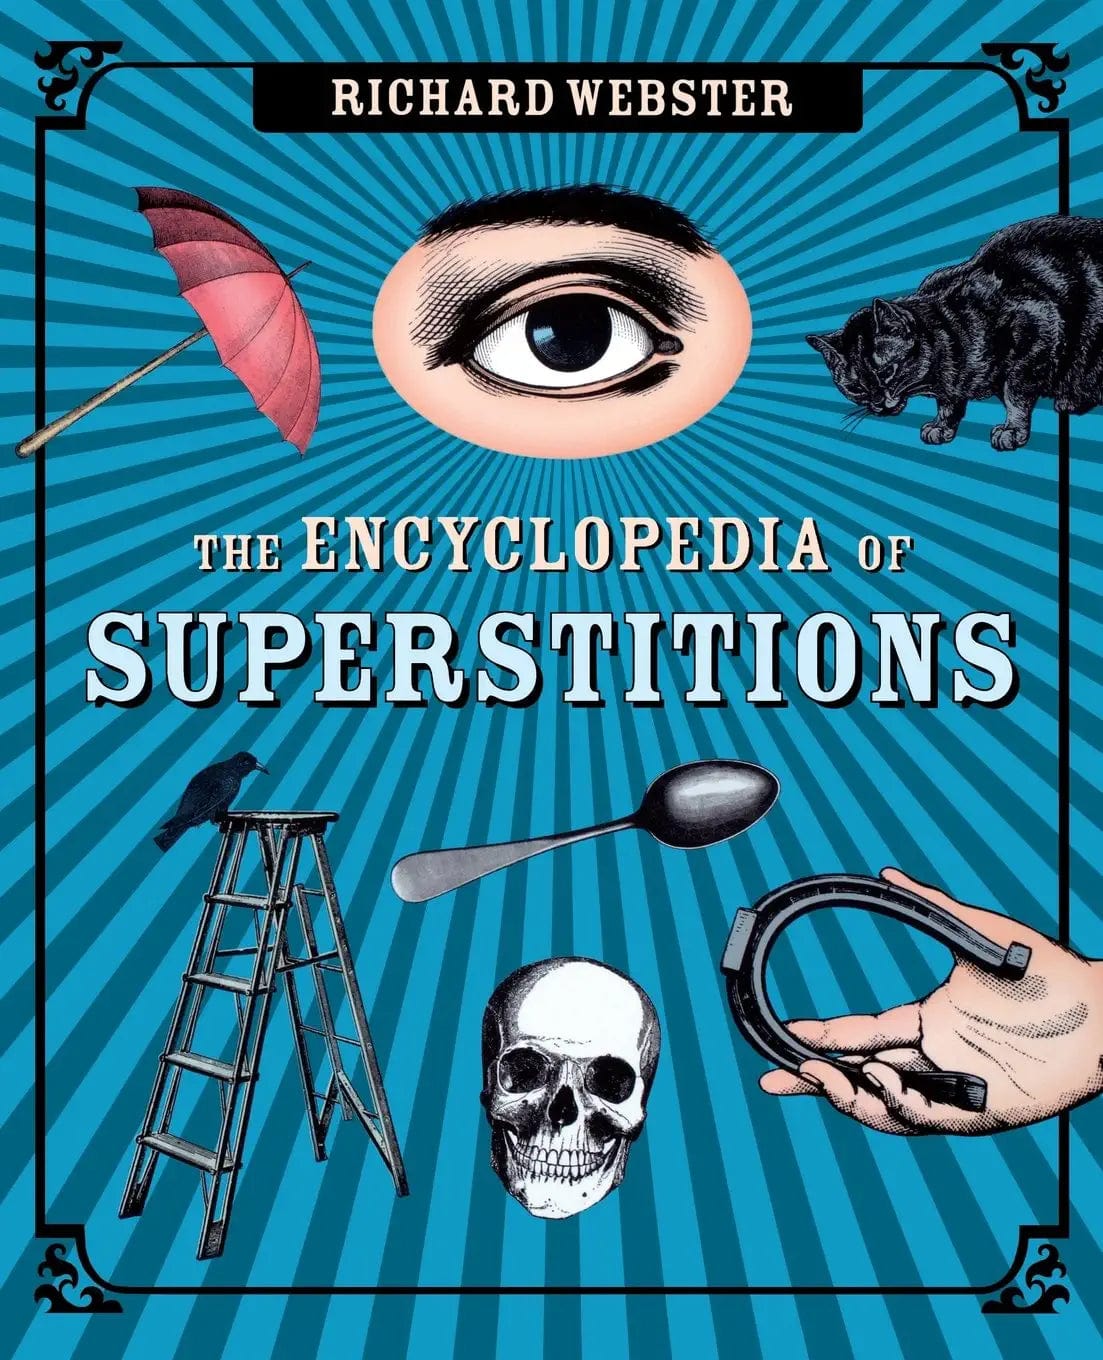 Encyclopedia of Superstitions - Third Eye